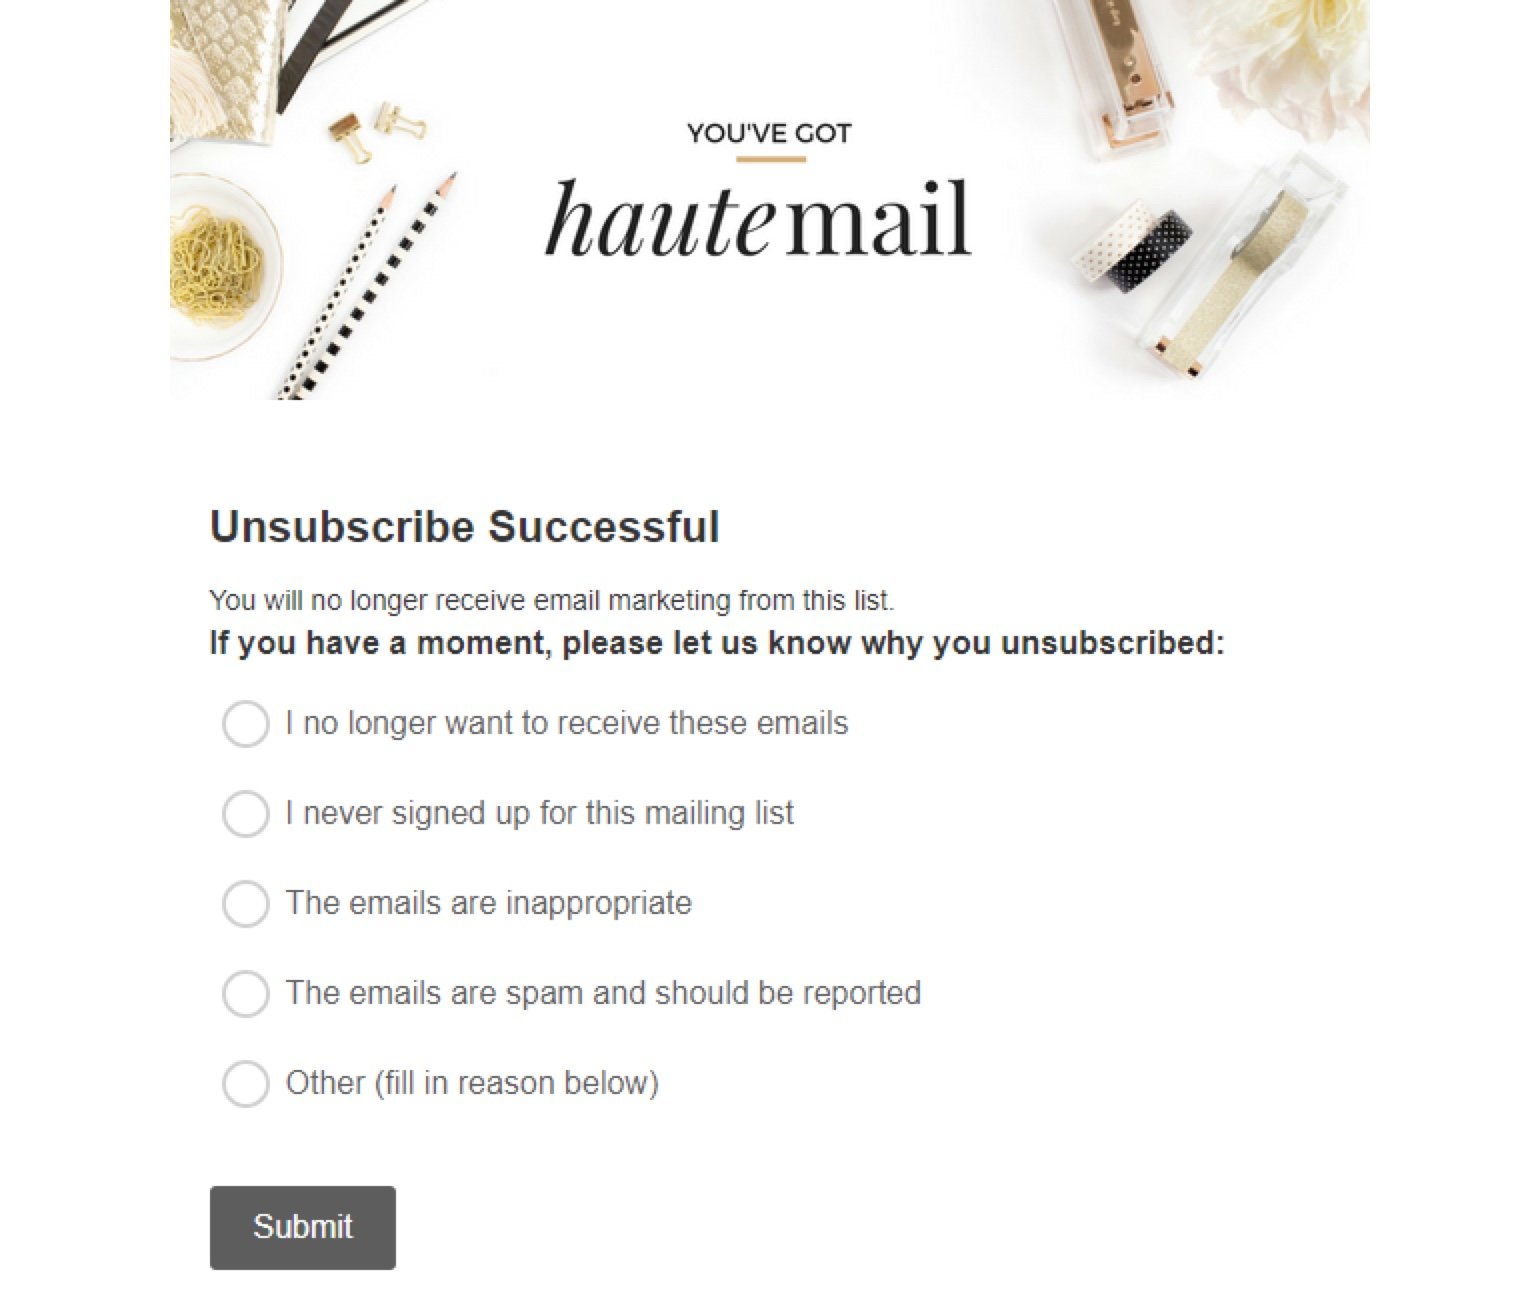 Haute mail unsubscribe page example